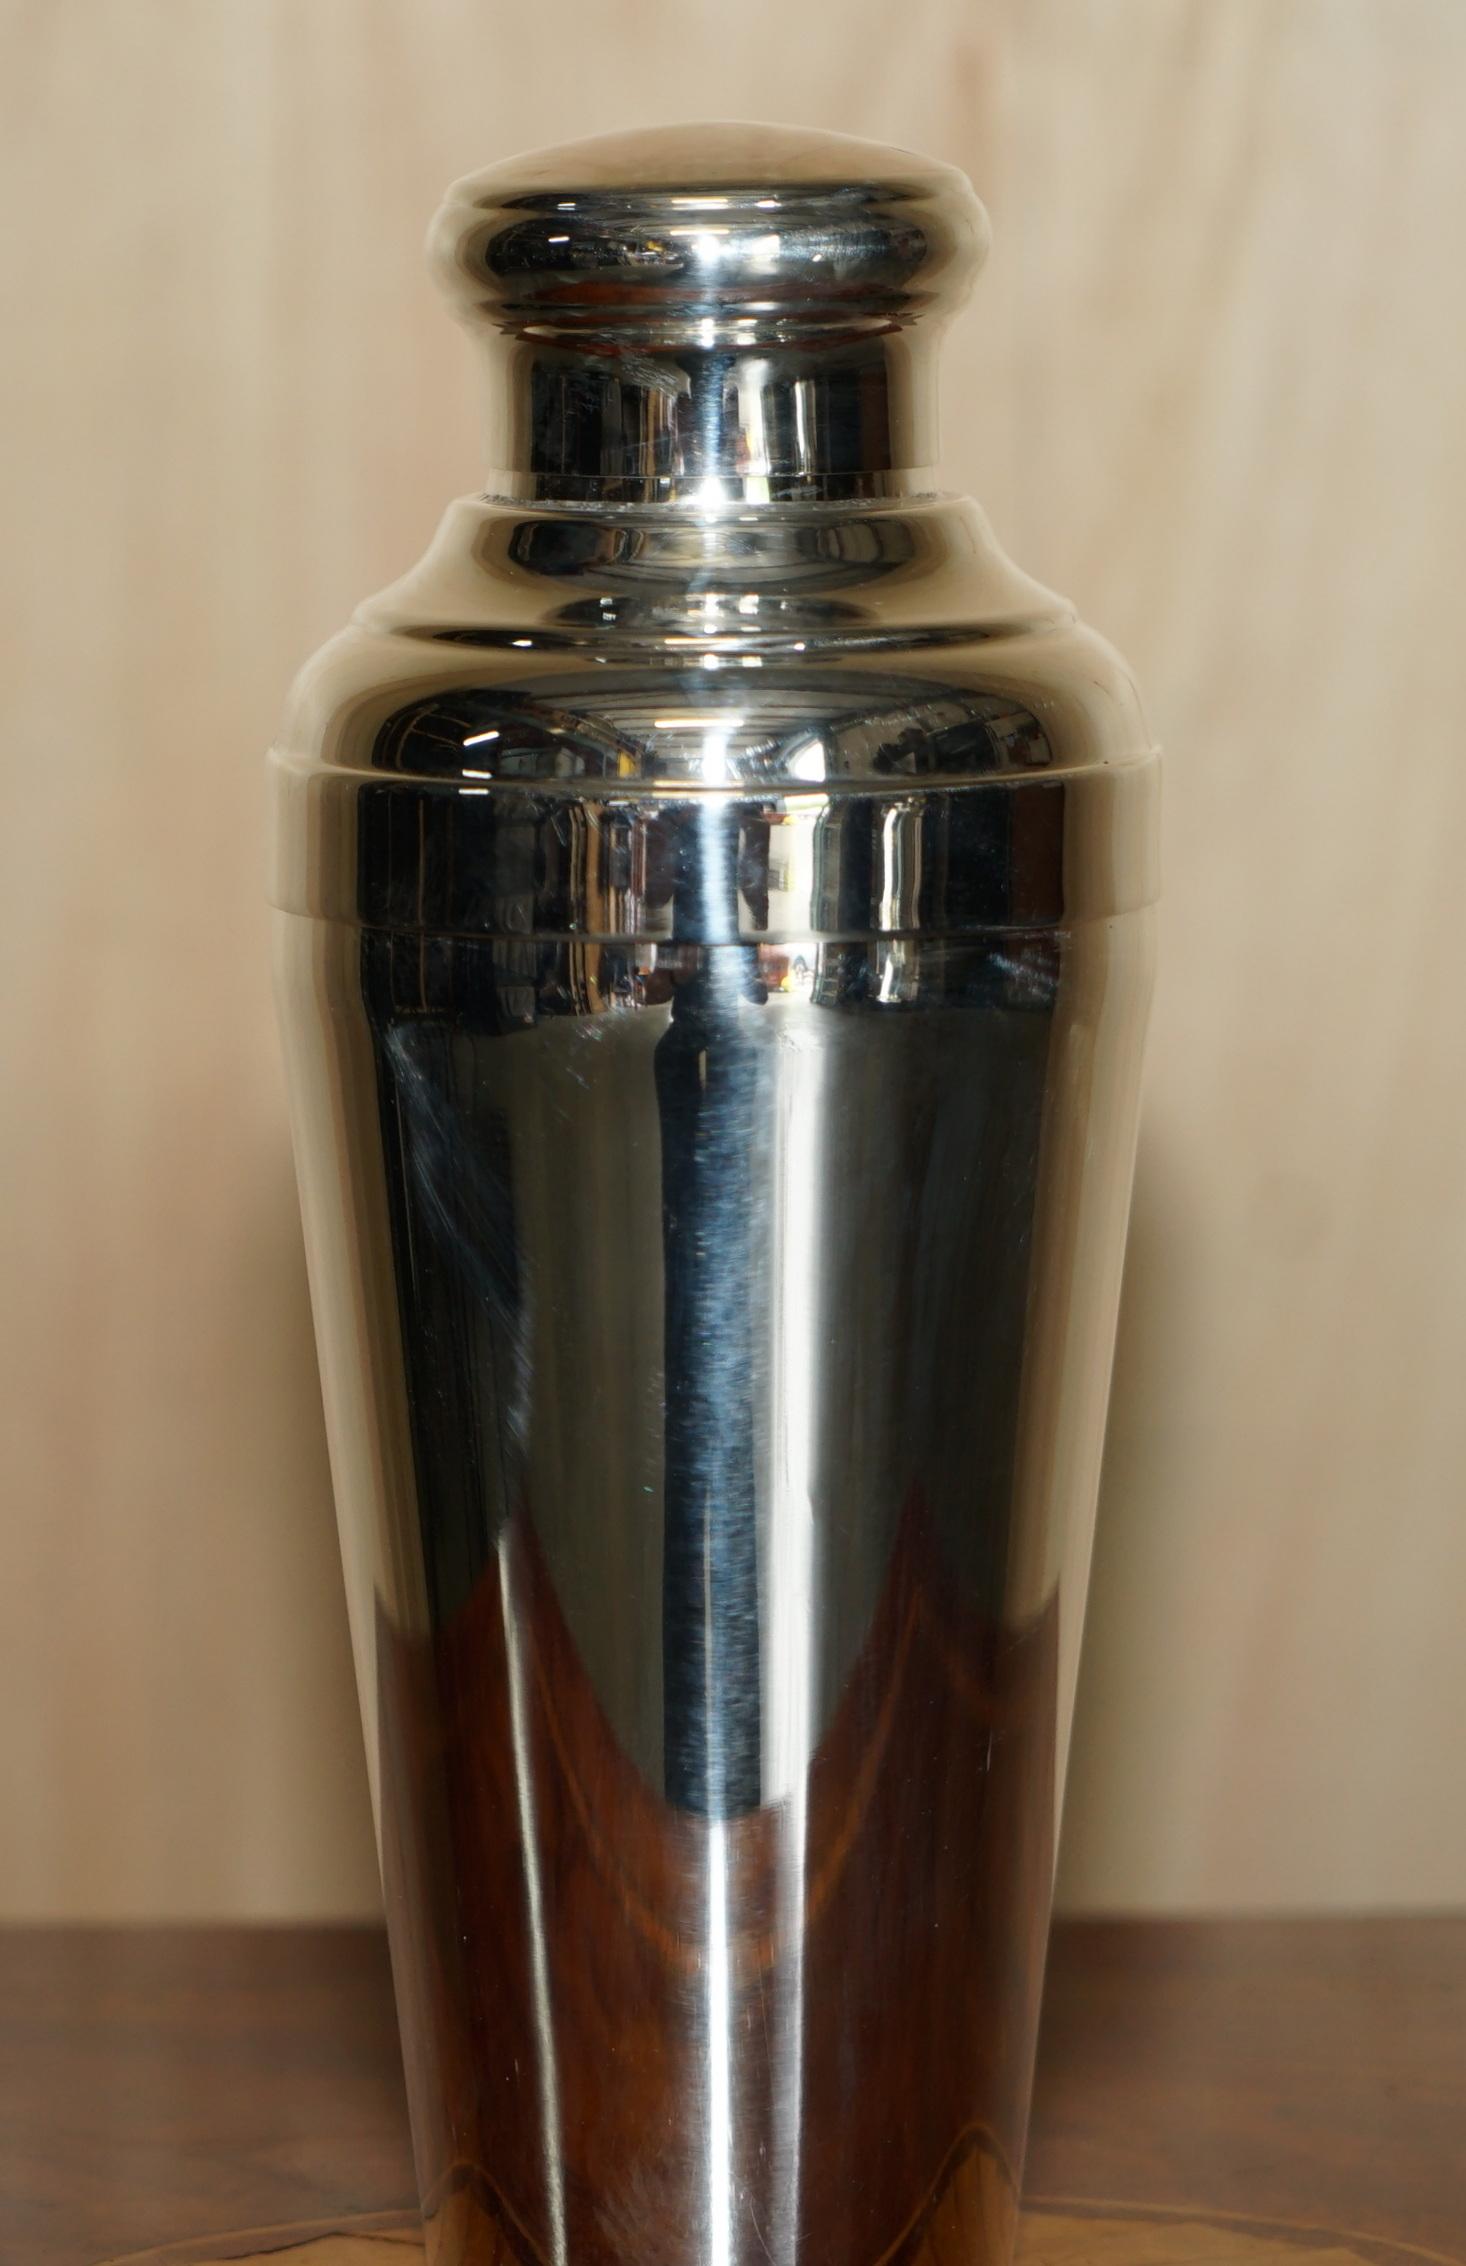 We are delighted to offer this stunning, fully restored, hand made in France by the St Hilaire foundry, cocktail shaker

A good looking and well made piece, it is of course a traditional Art Deco cocktail shaker, it has been fully restored to